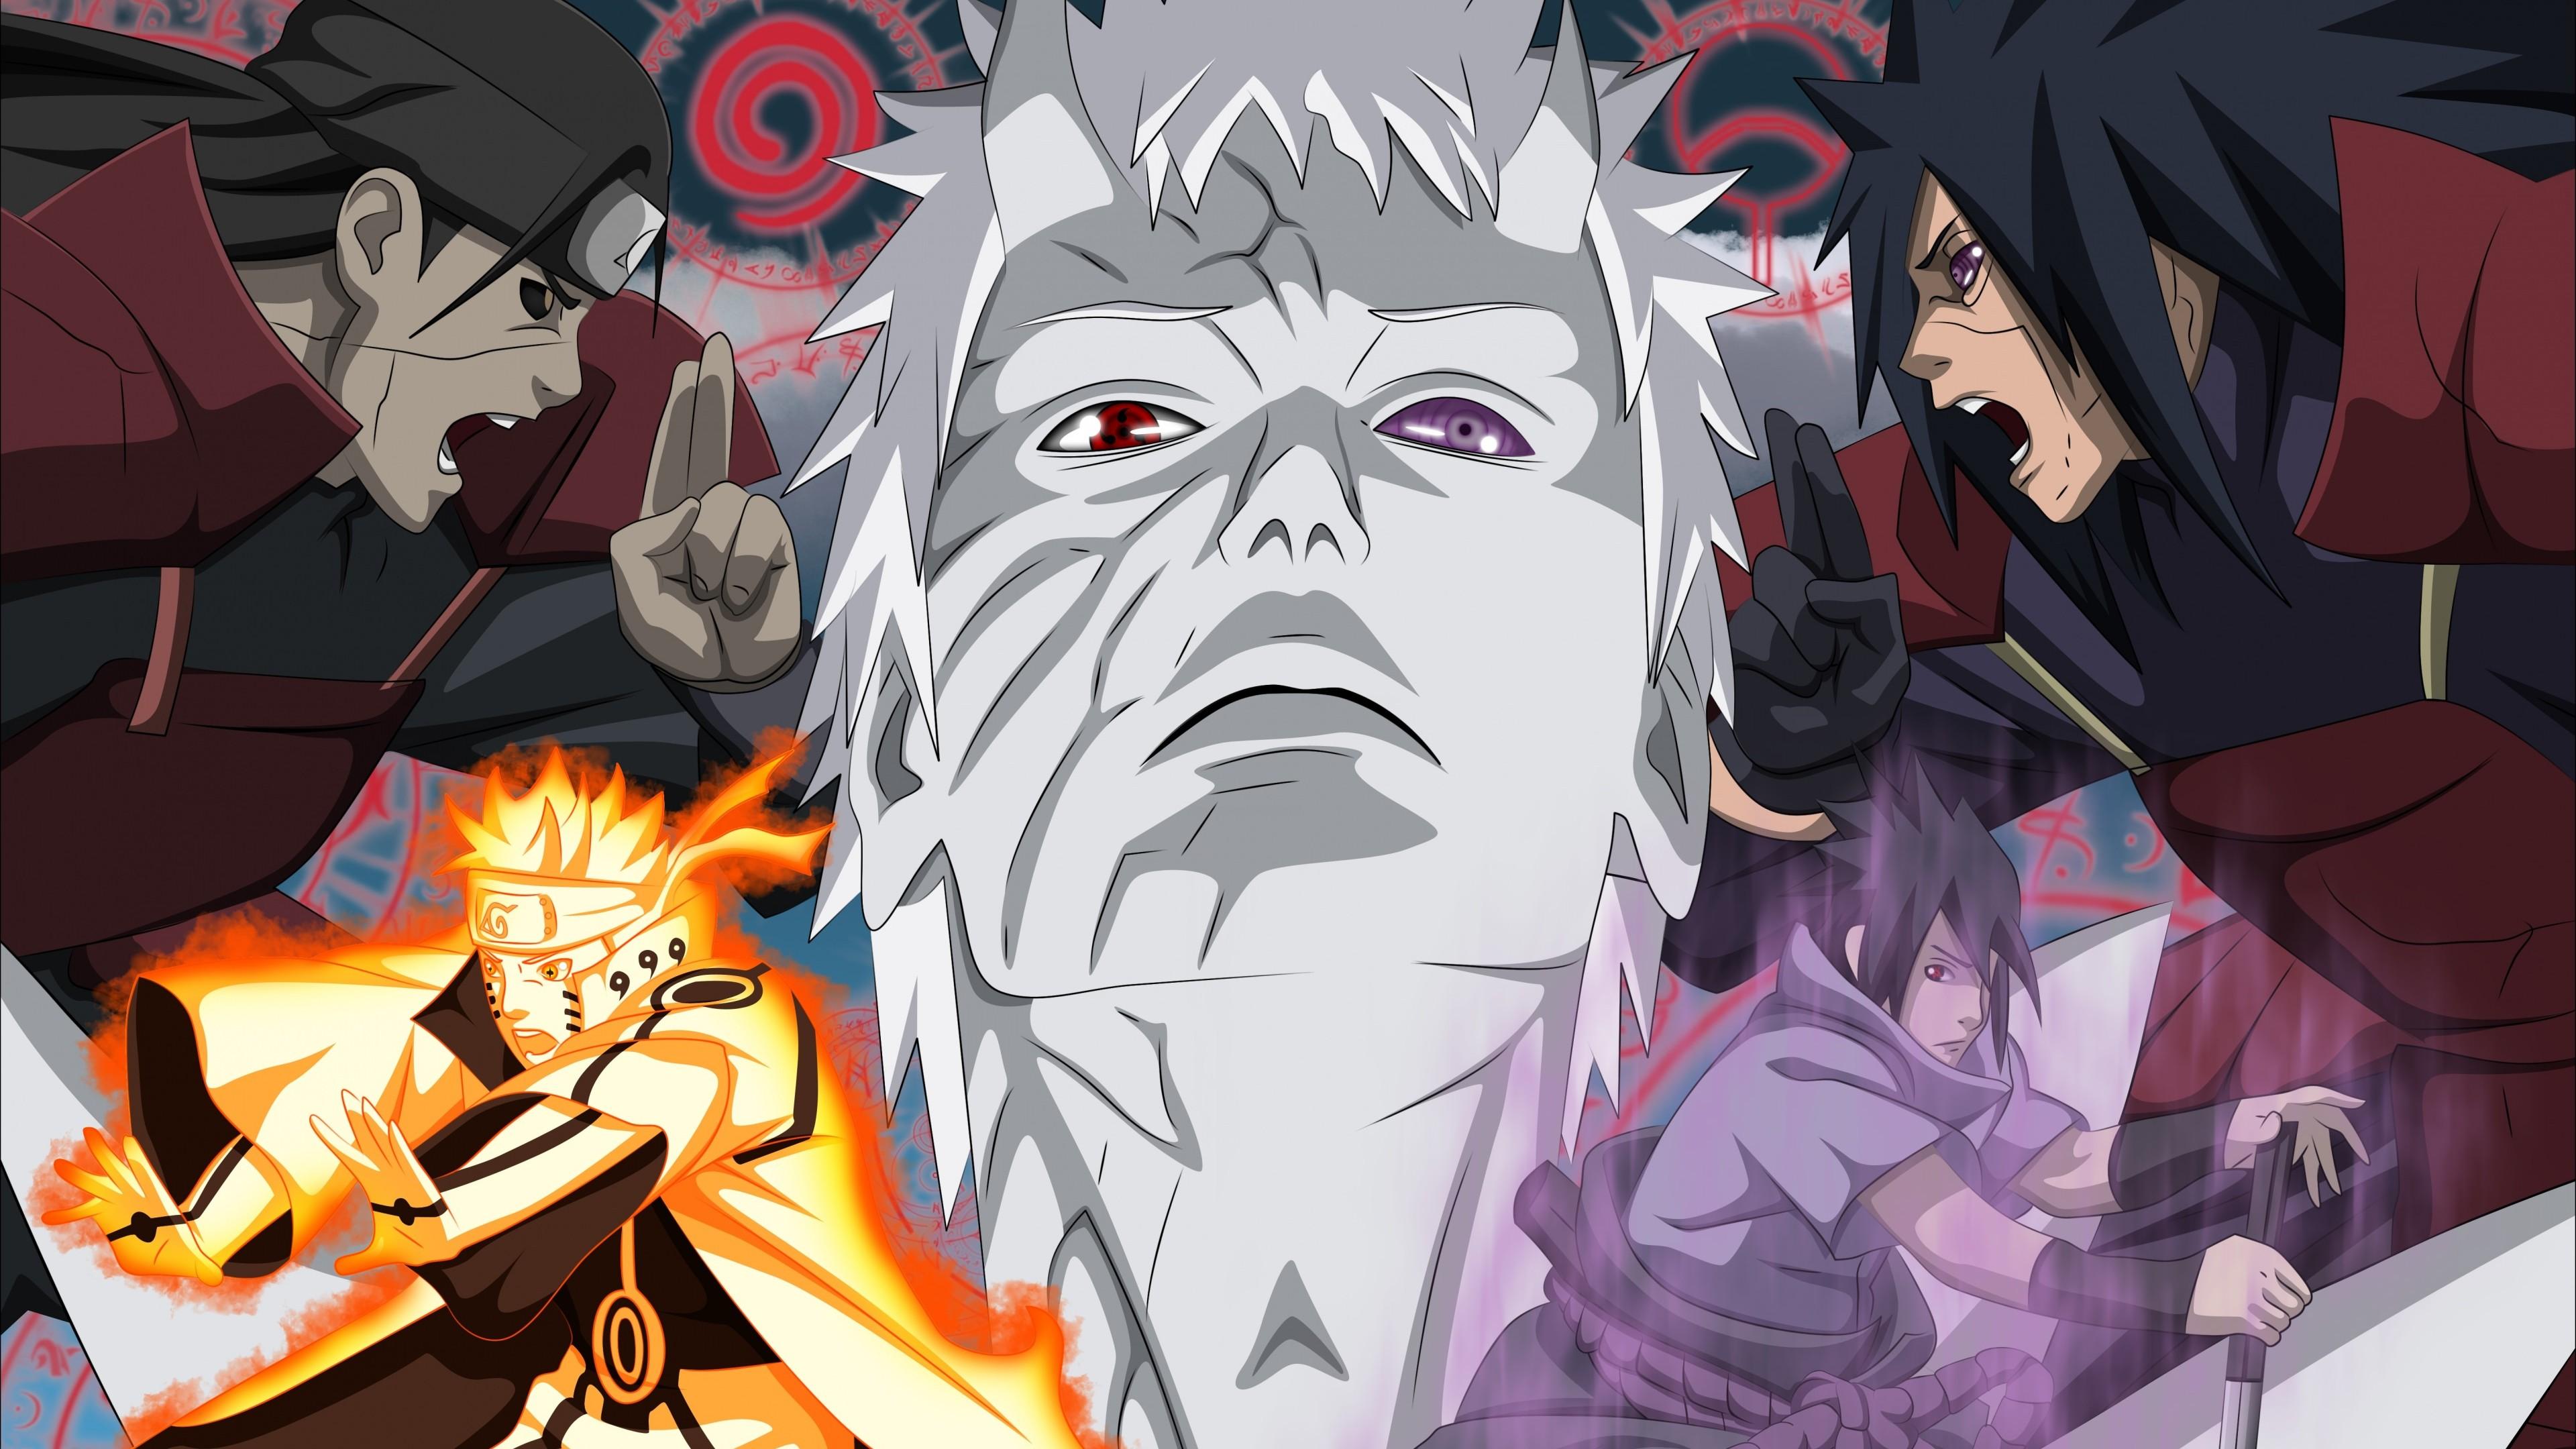 Madara 4K wallpaper for your desktop or mobile screen free and easy to download